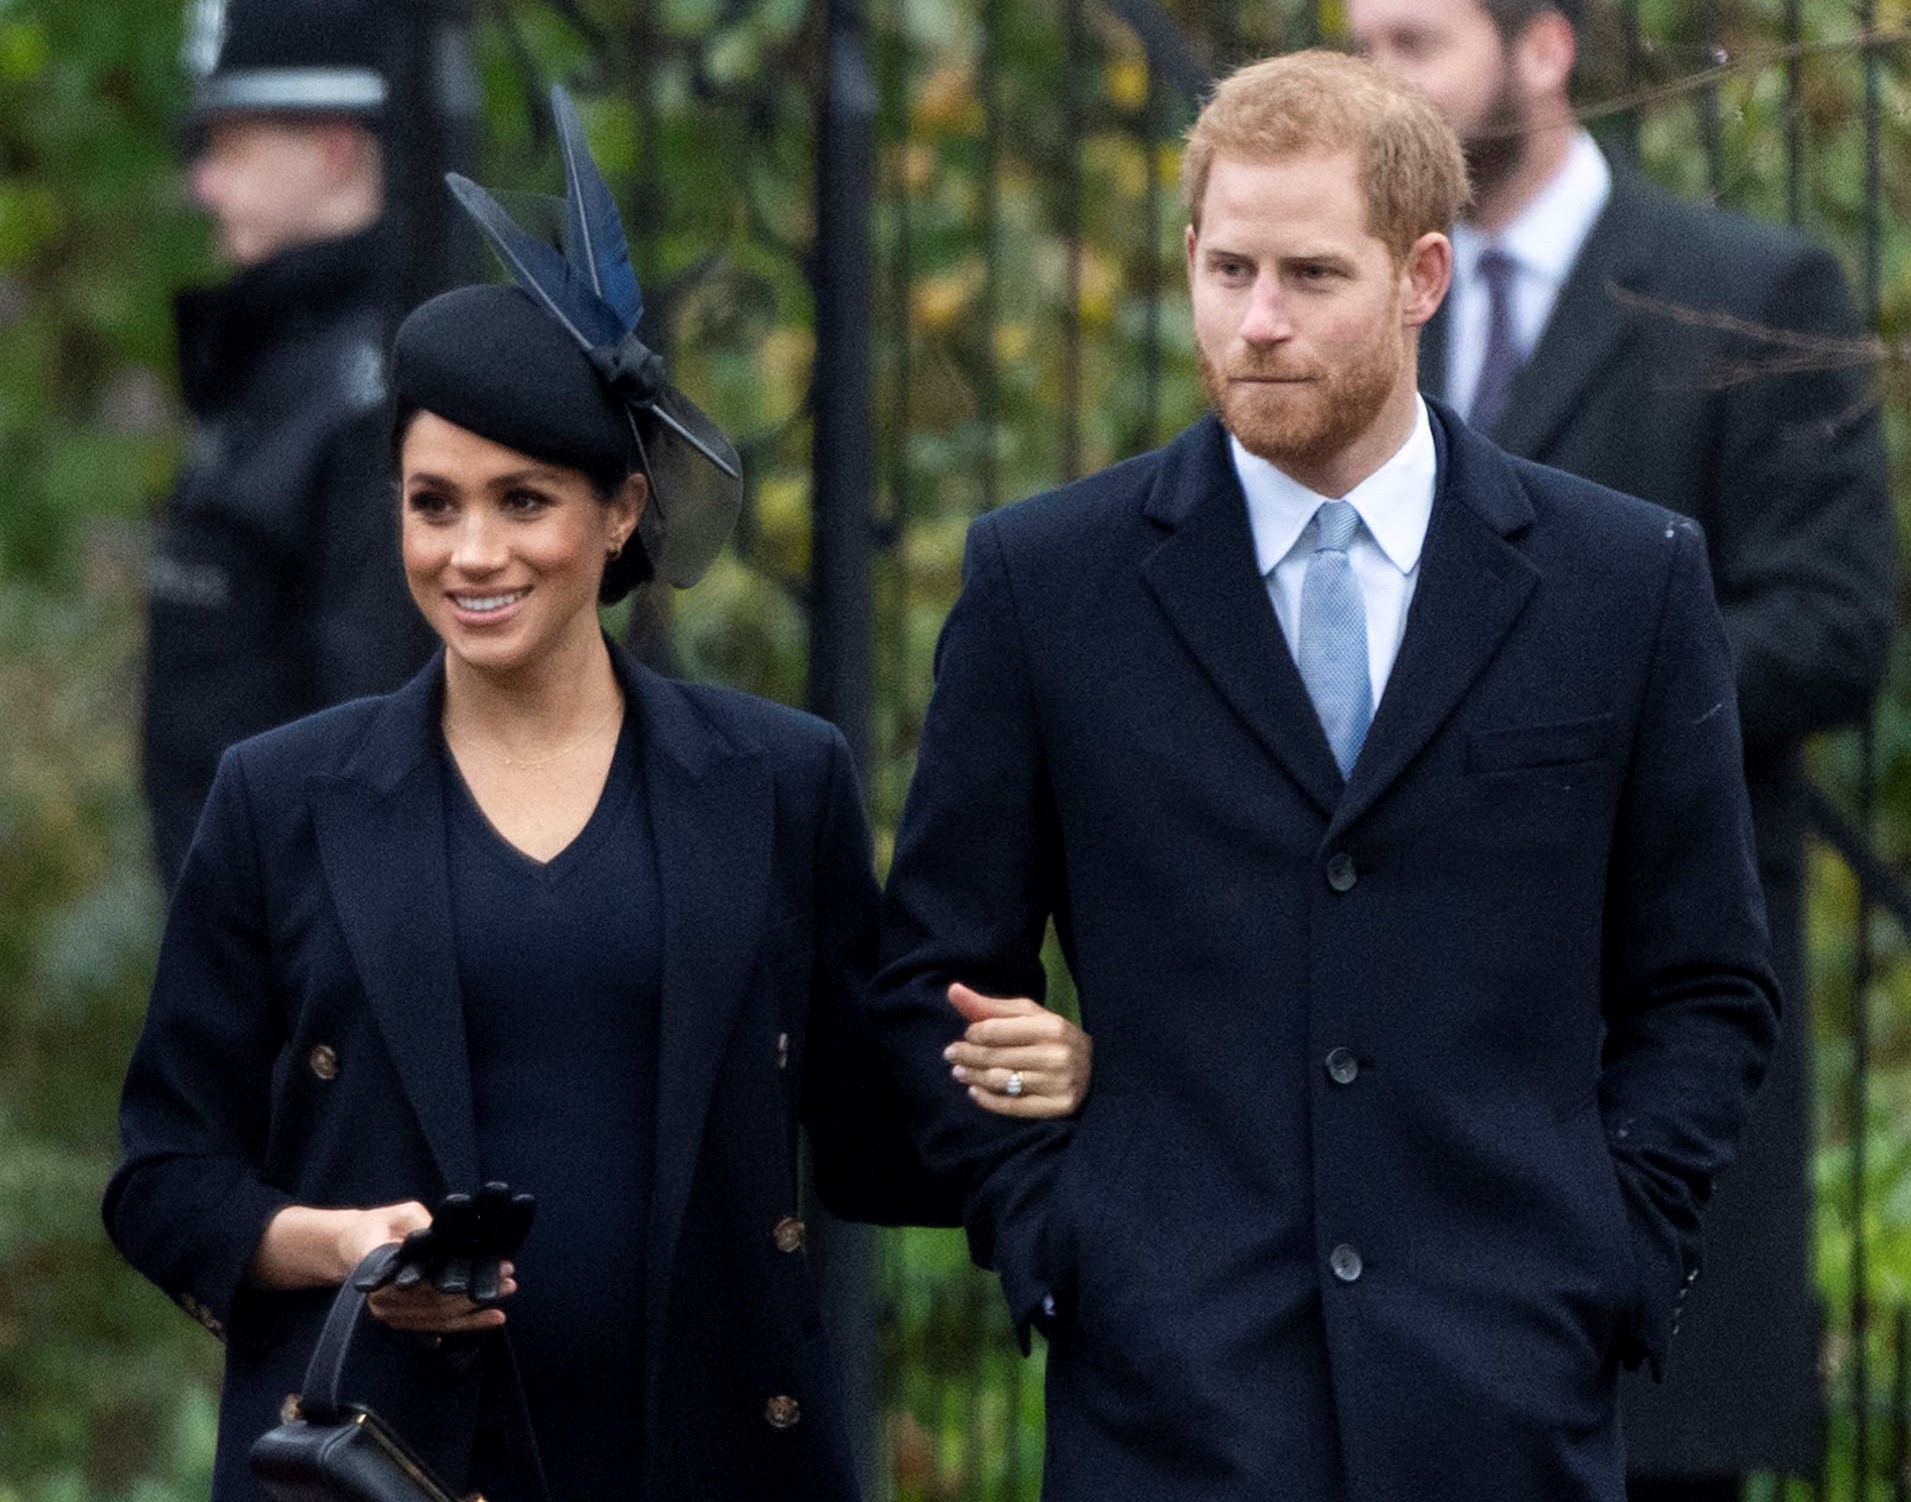 Meghan Markle and Prince Harry attending the Christmas Day church service at Sandringham in 2018